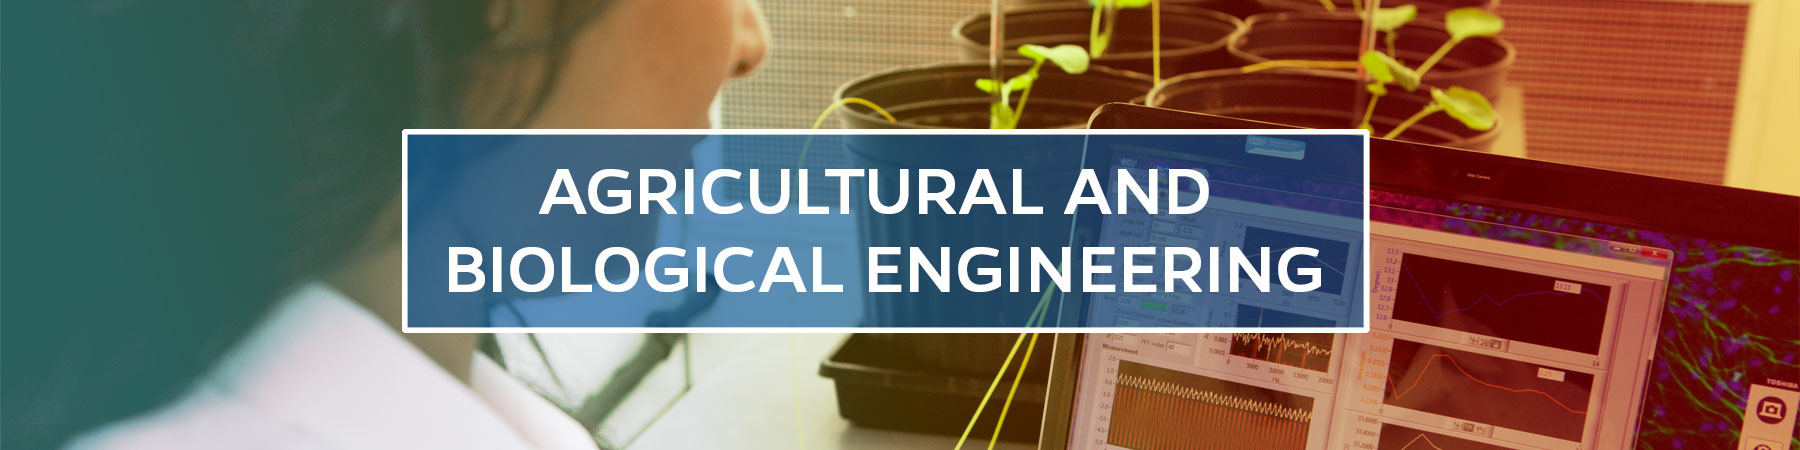 Agricultural and Biological Engineering